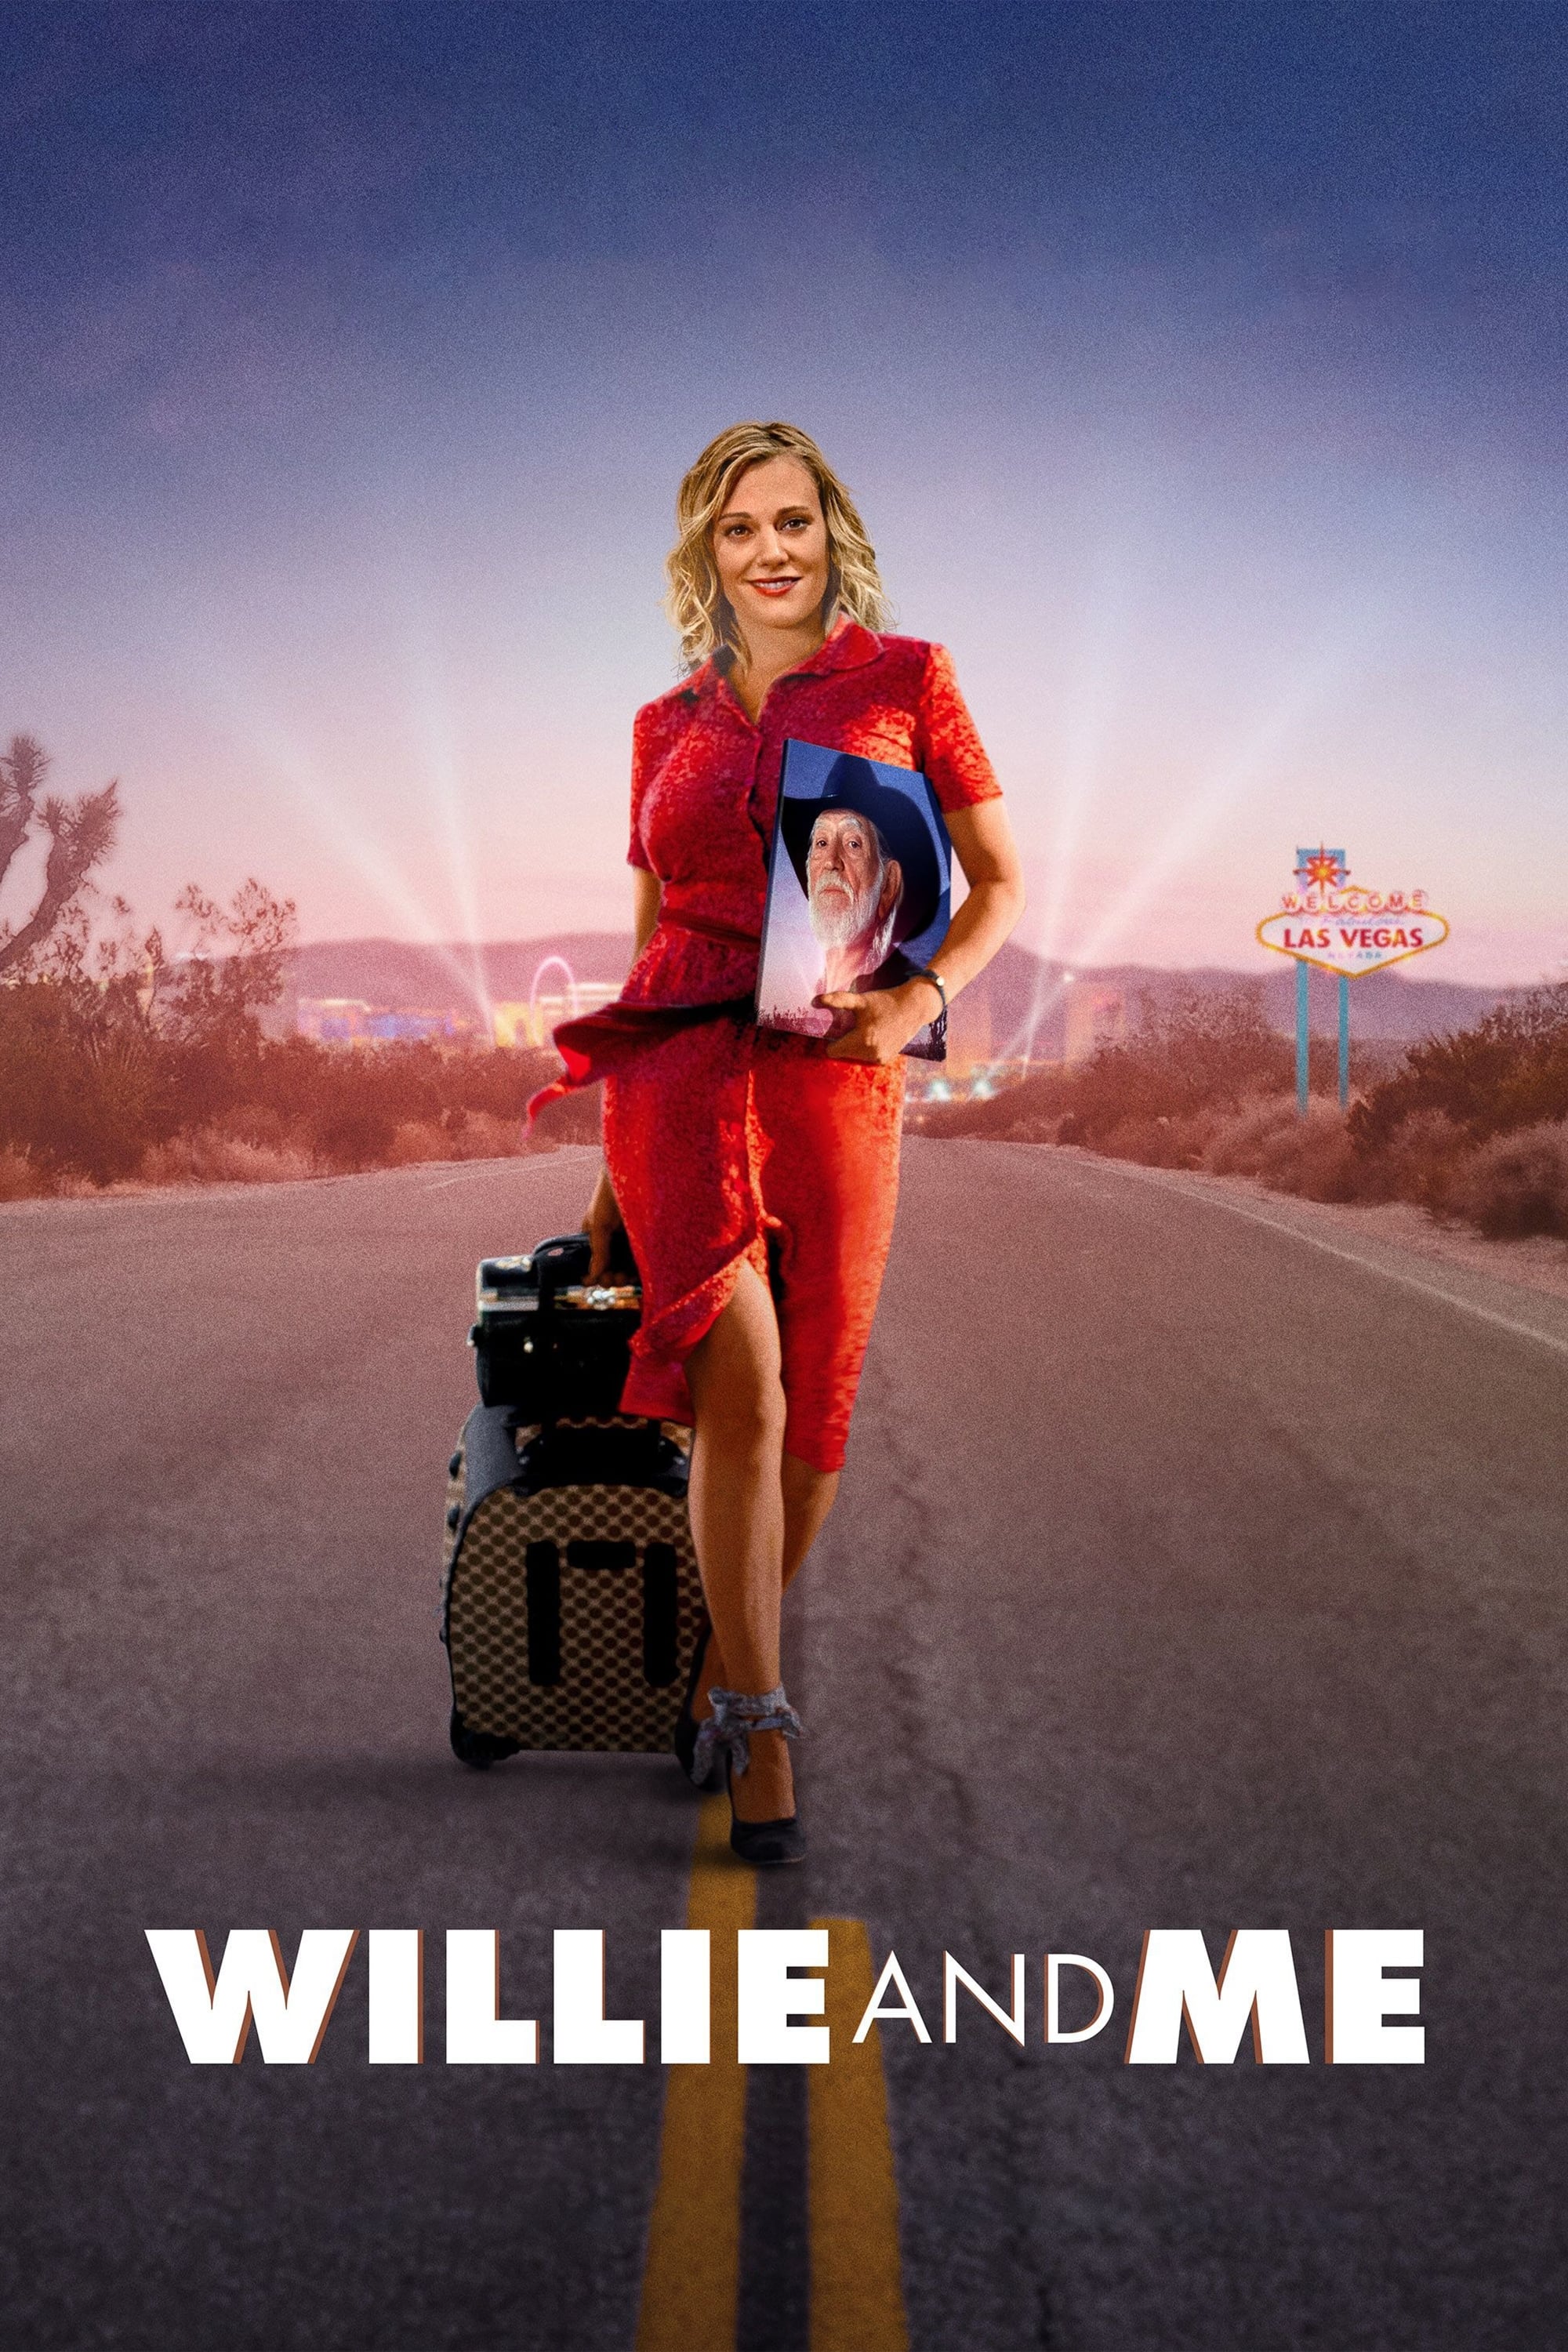 Poster for the movie "Willie and Me"